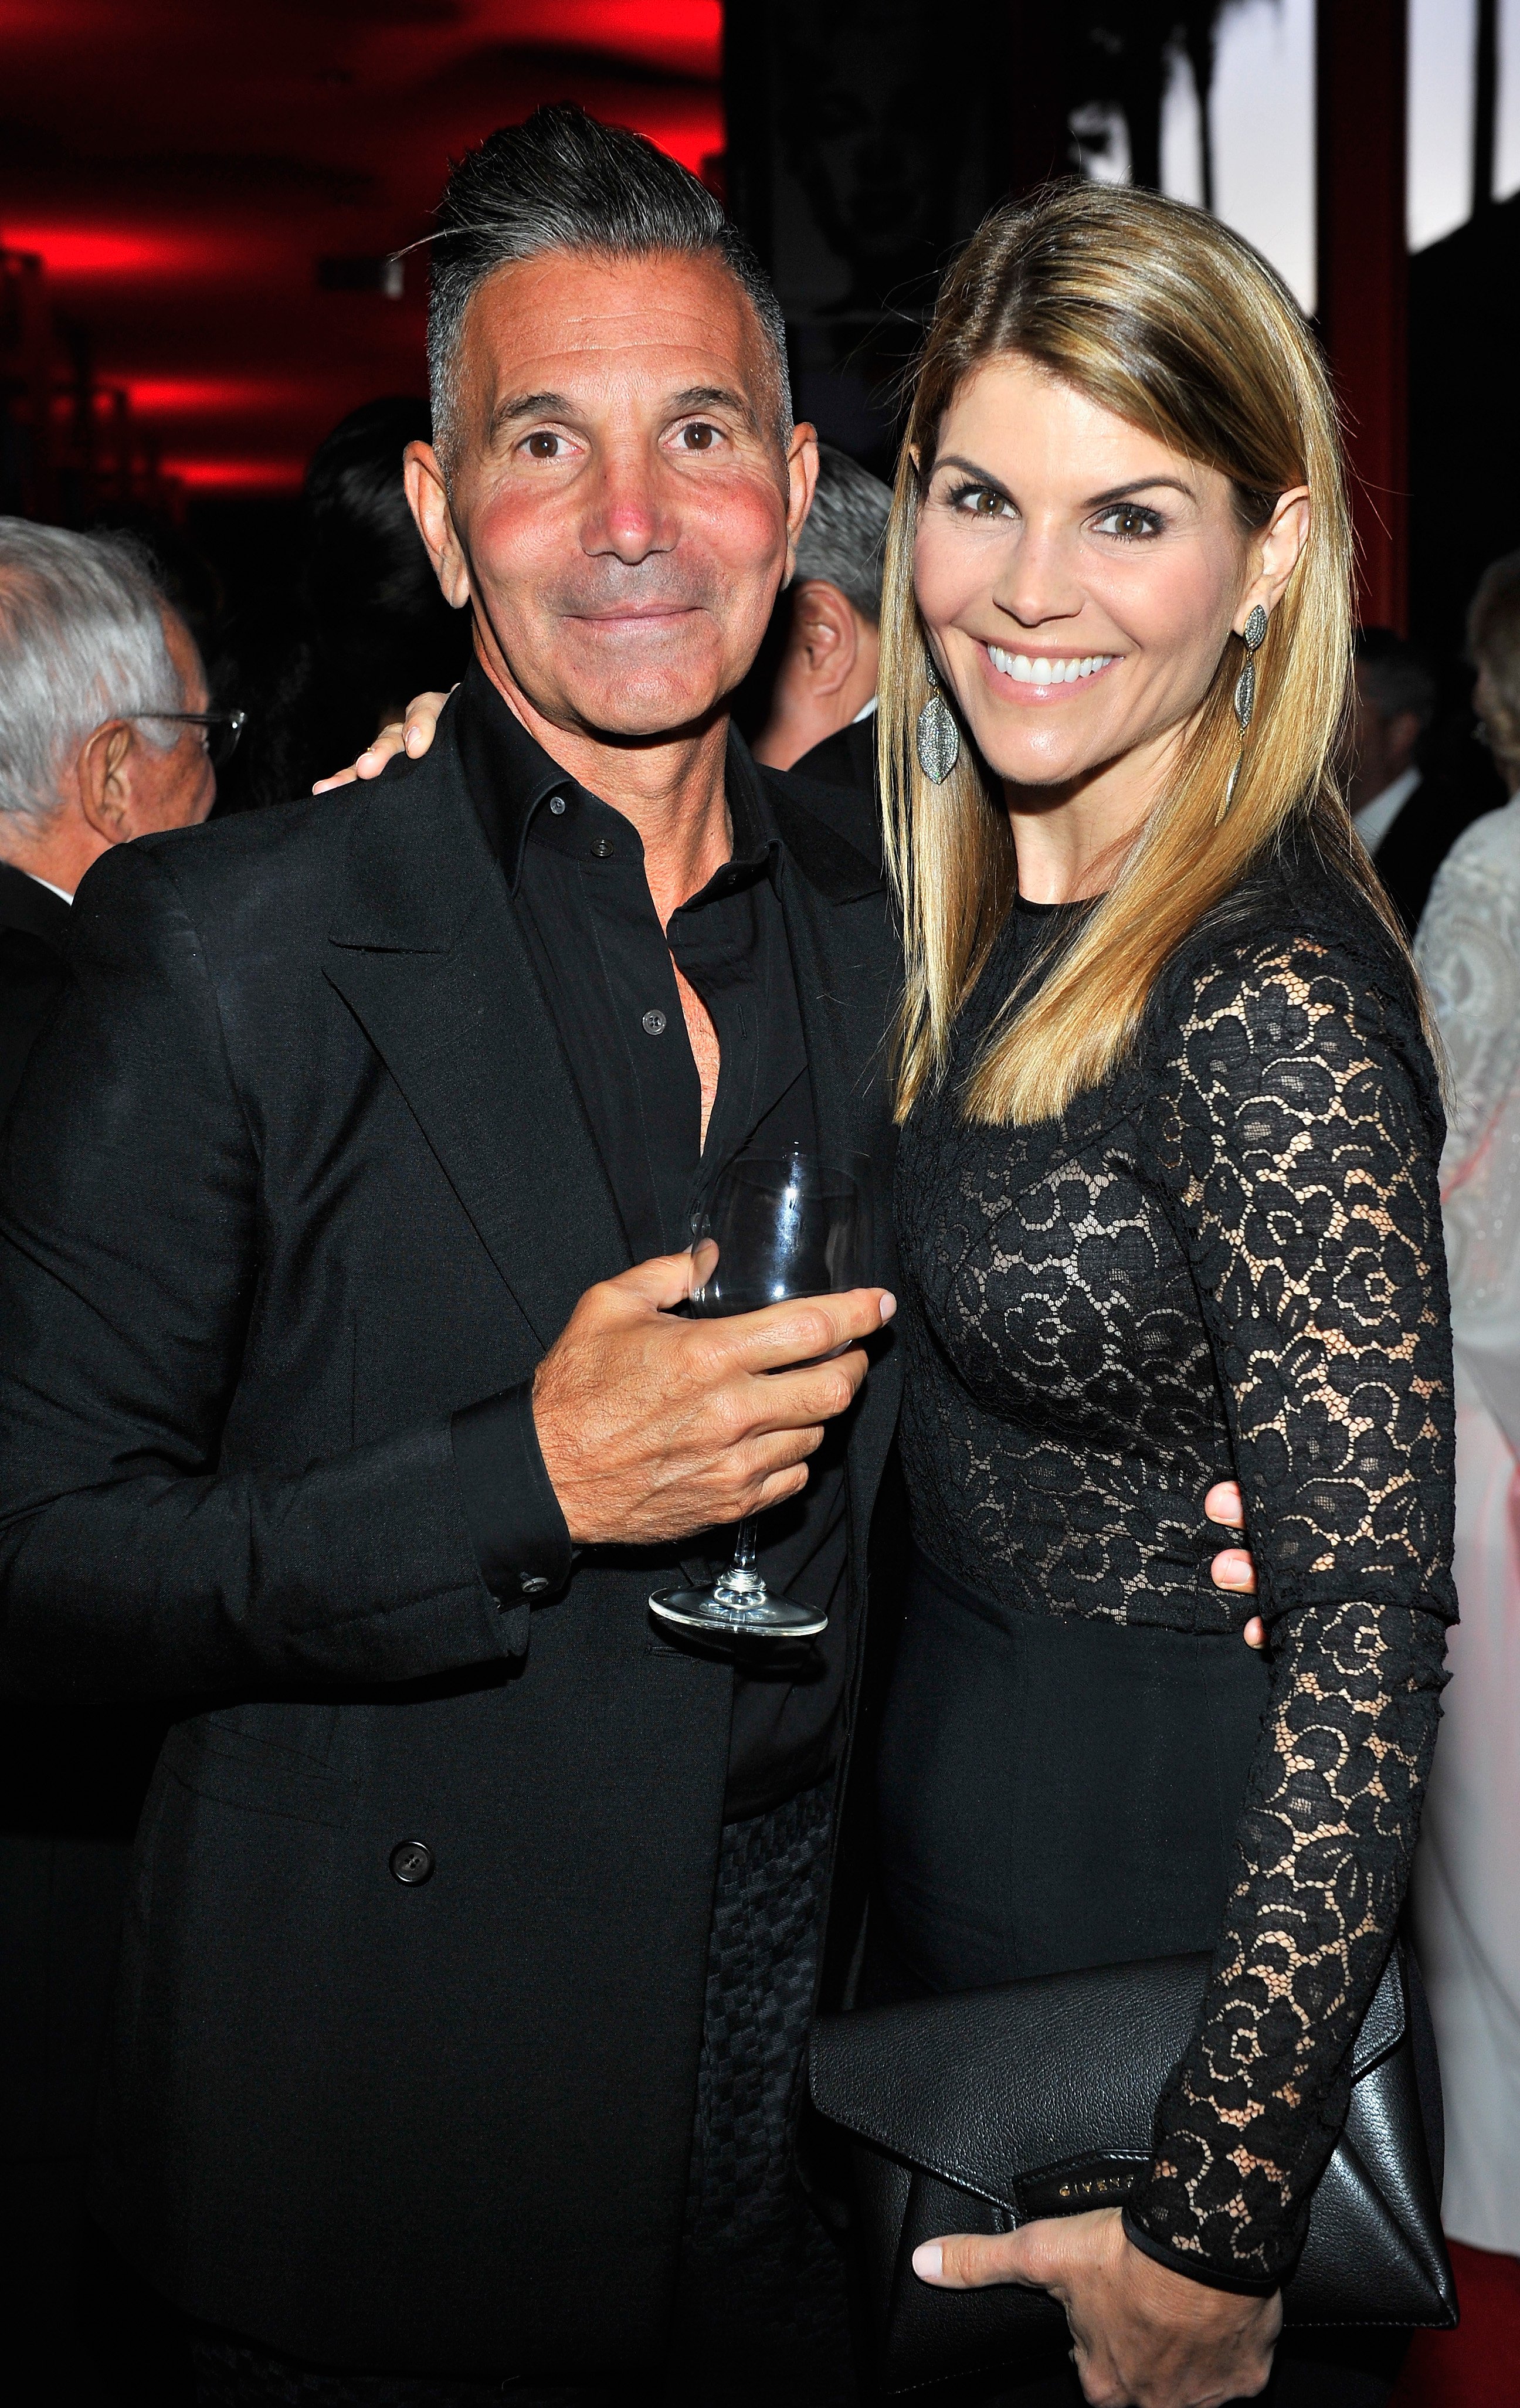 A much happier time for Mossimo Giannulli and his wife, Lori Loughlin attending an event in Los Angeles in April, 2015. | Photo: Getty Images.